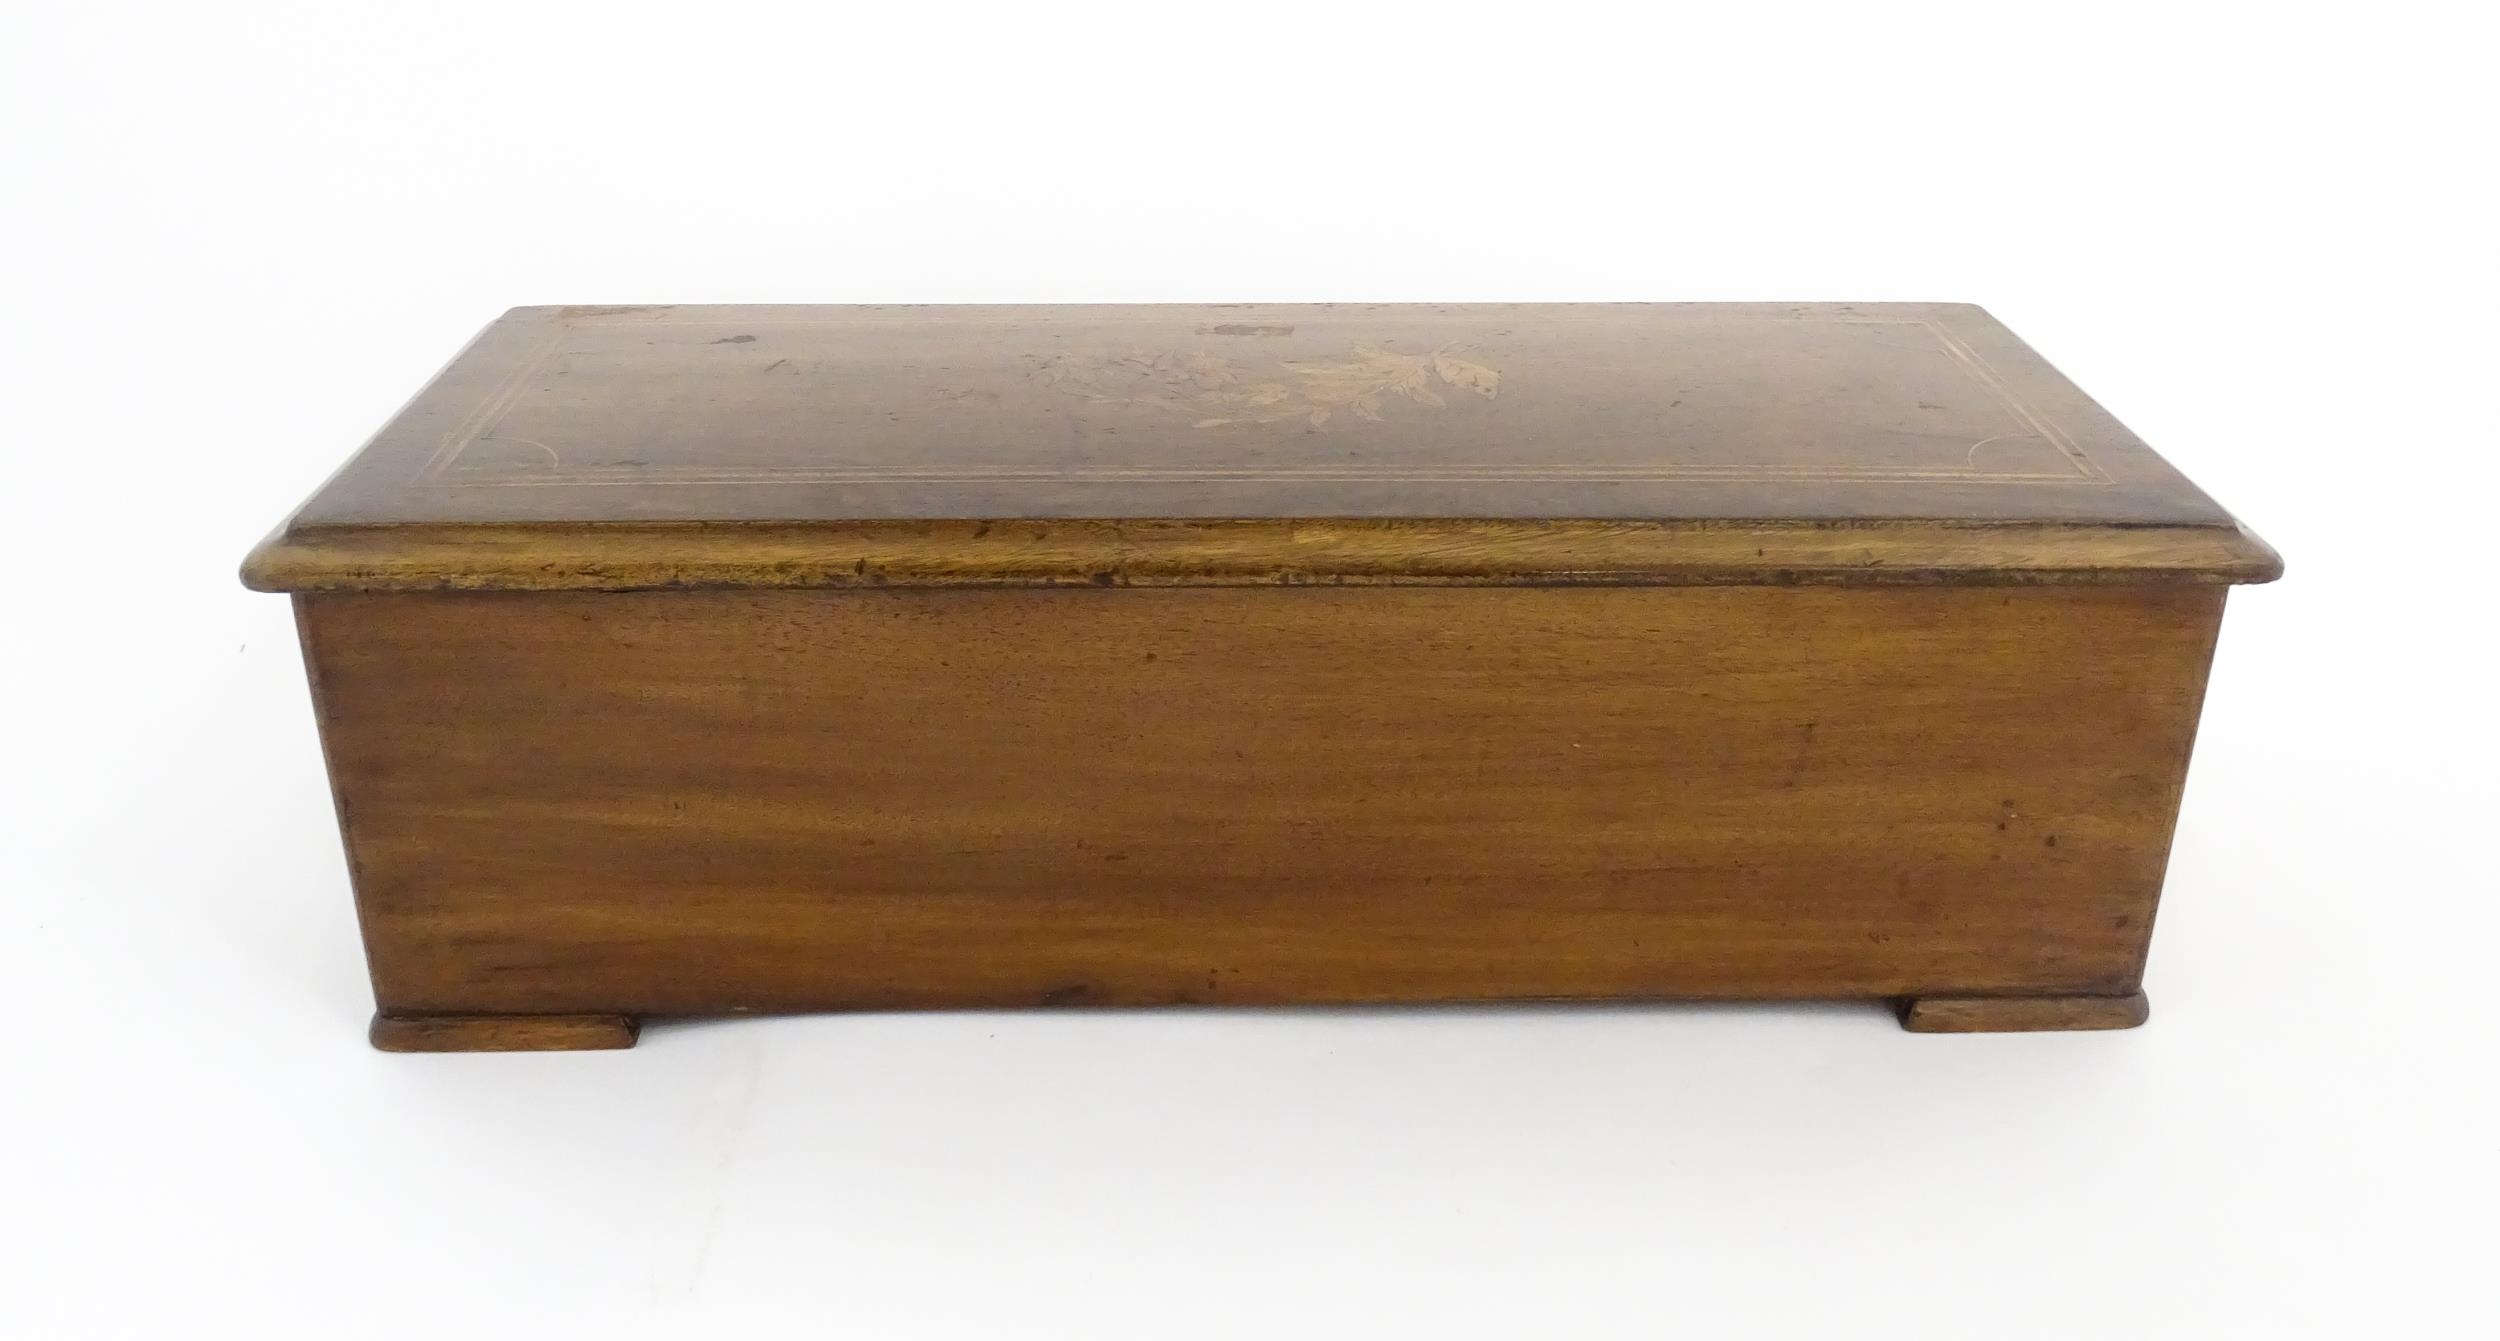 A 19thC Swiss rosewood music box with marquetry inlaid decoration to lid, playing 10 airs, by PVF of - Image 8 of 13